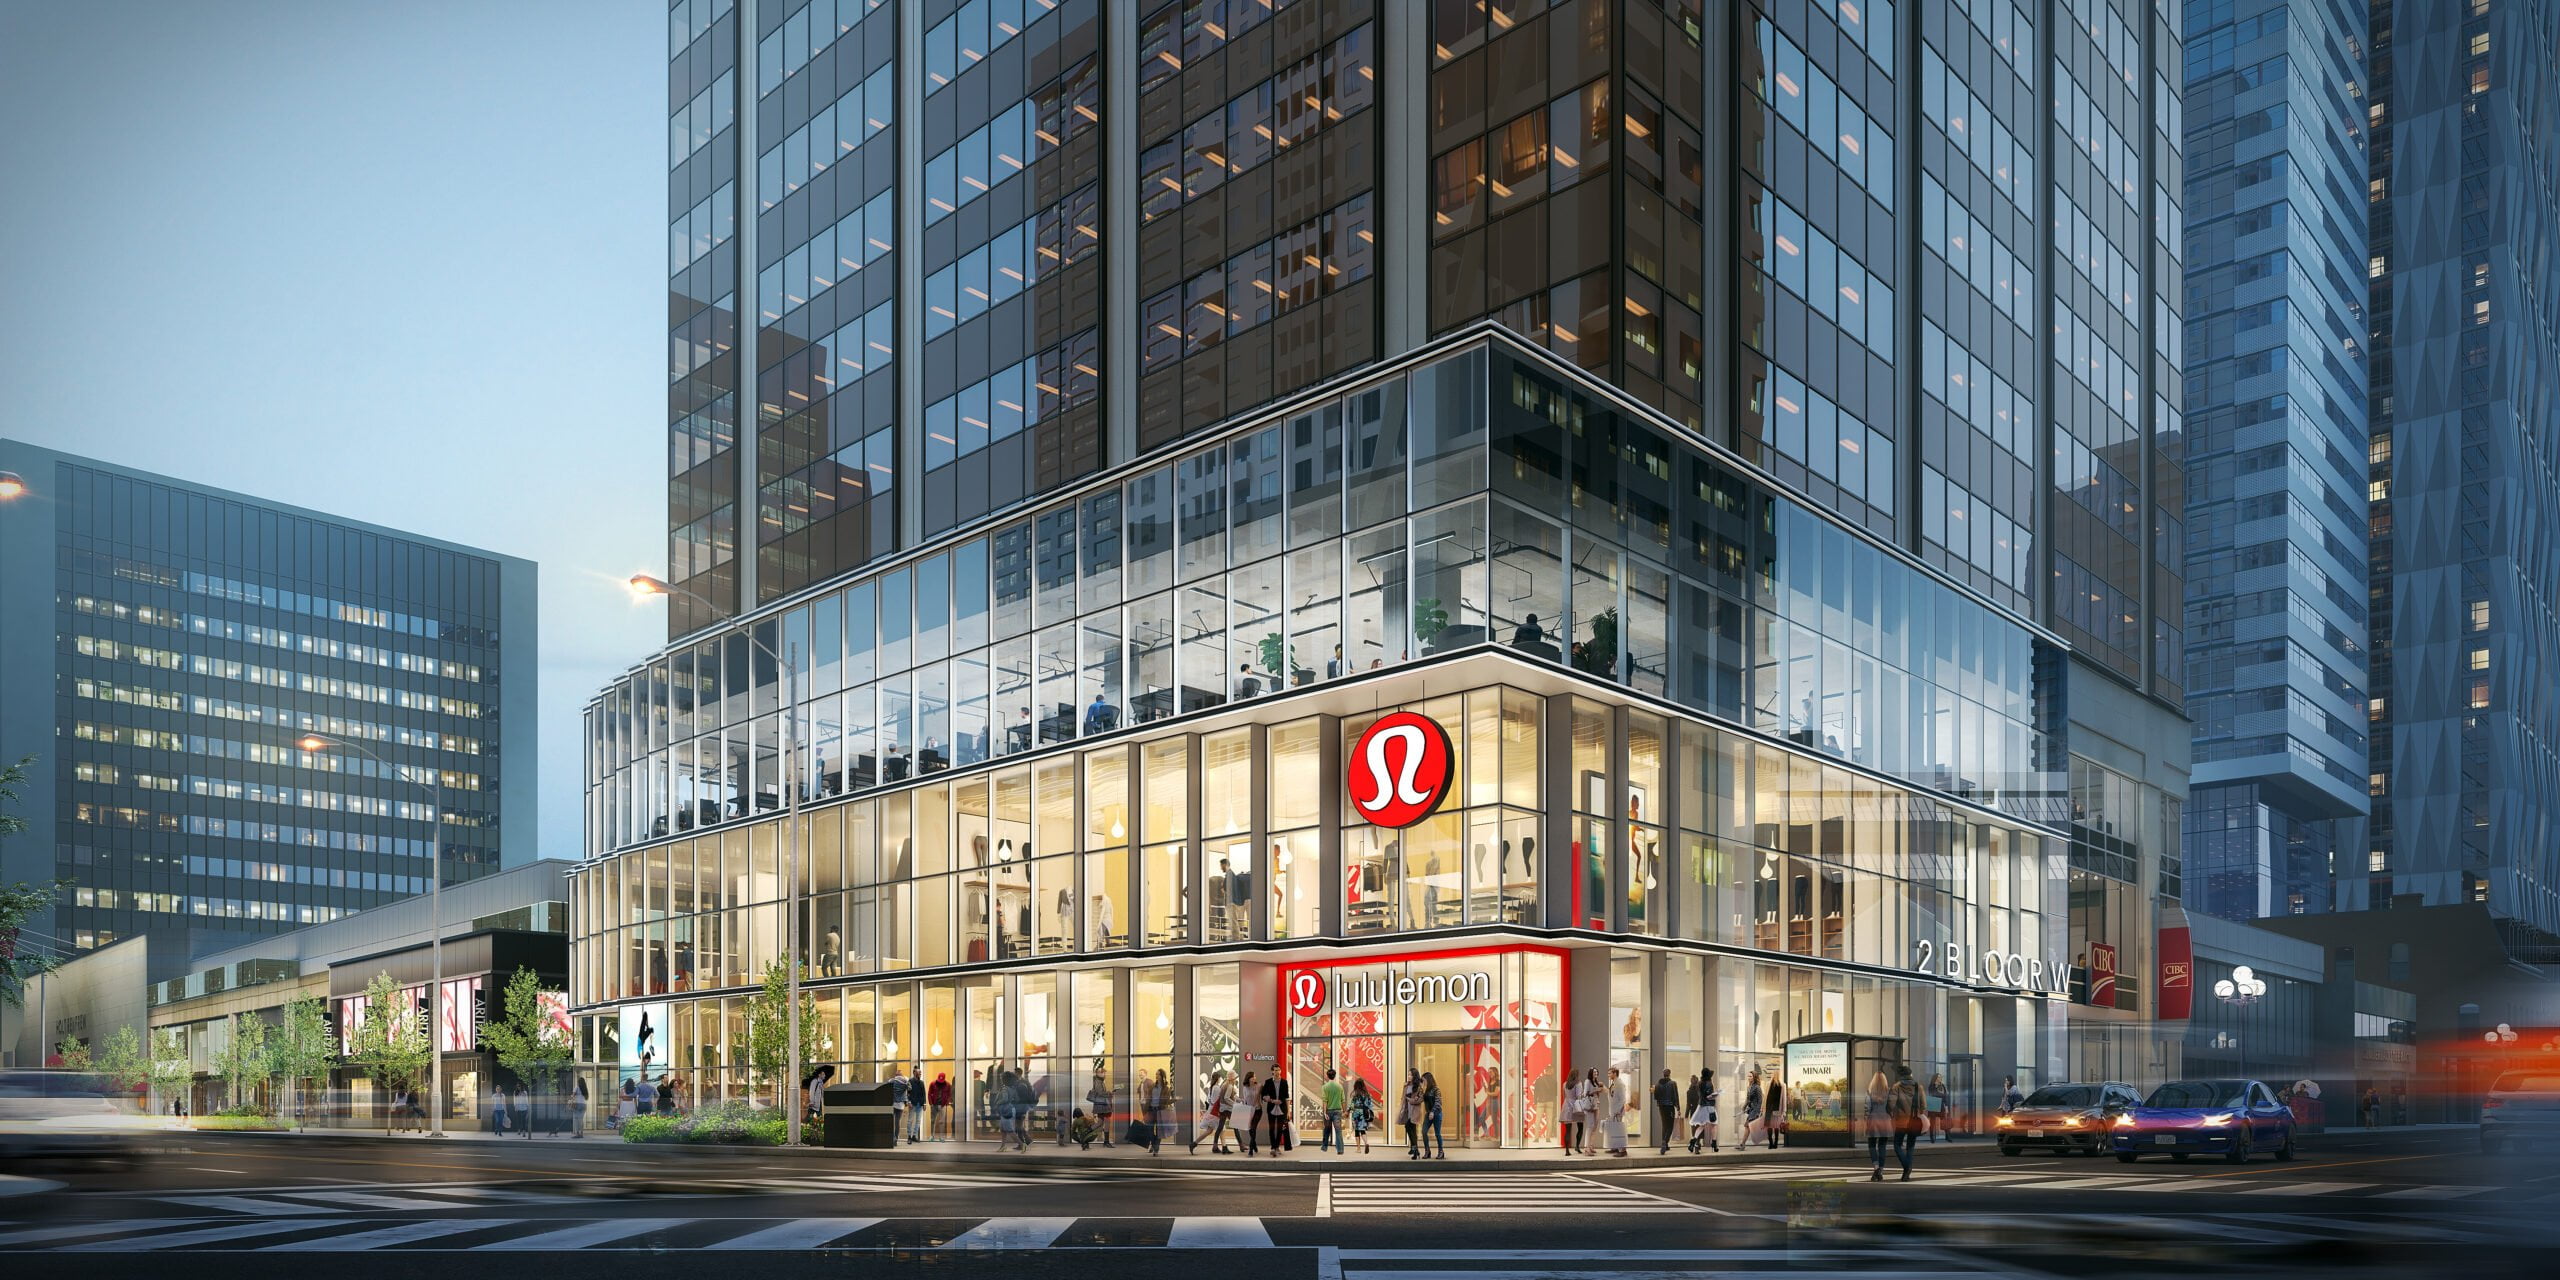 lululemon to Open 3-Level Flagship Store at Yonge and Bloor